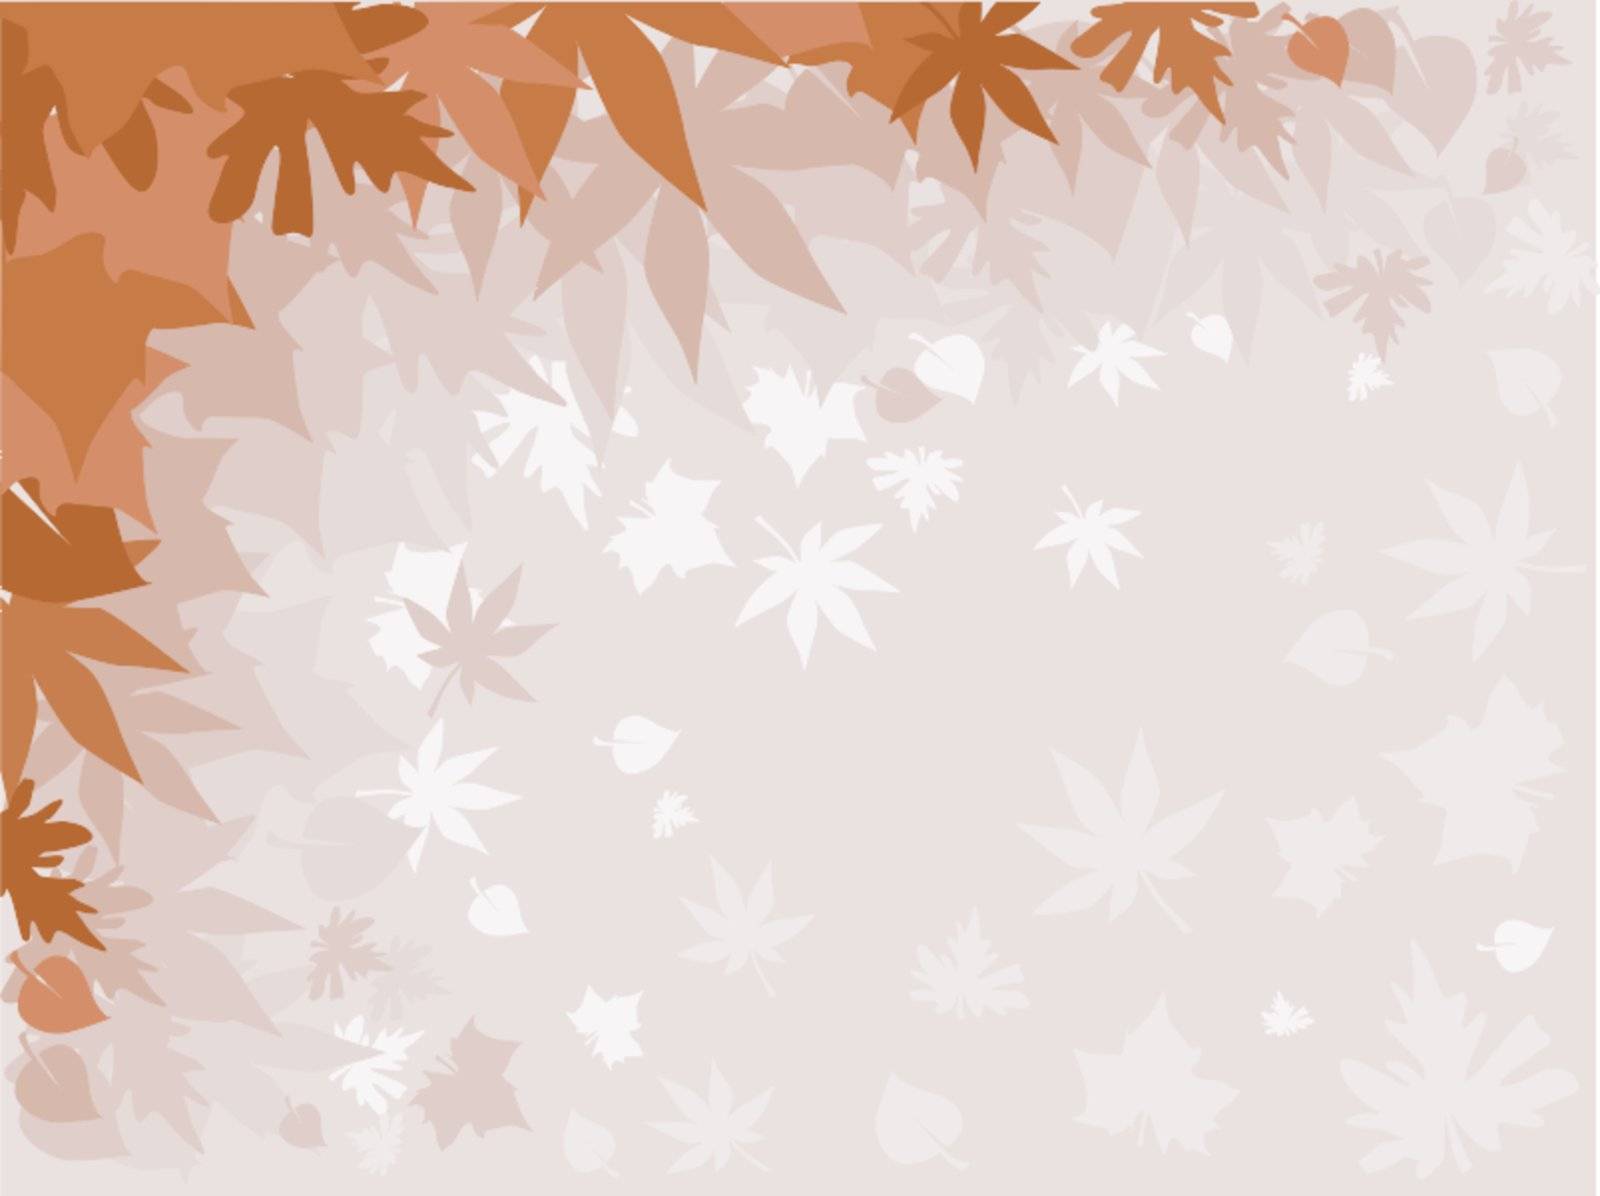 Background with autumn leaves in the fog